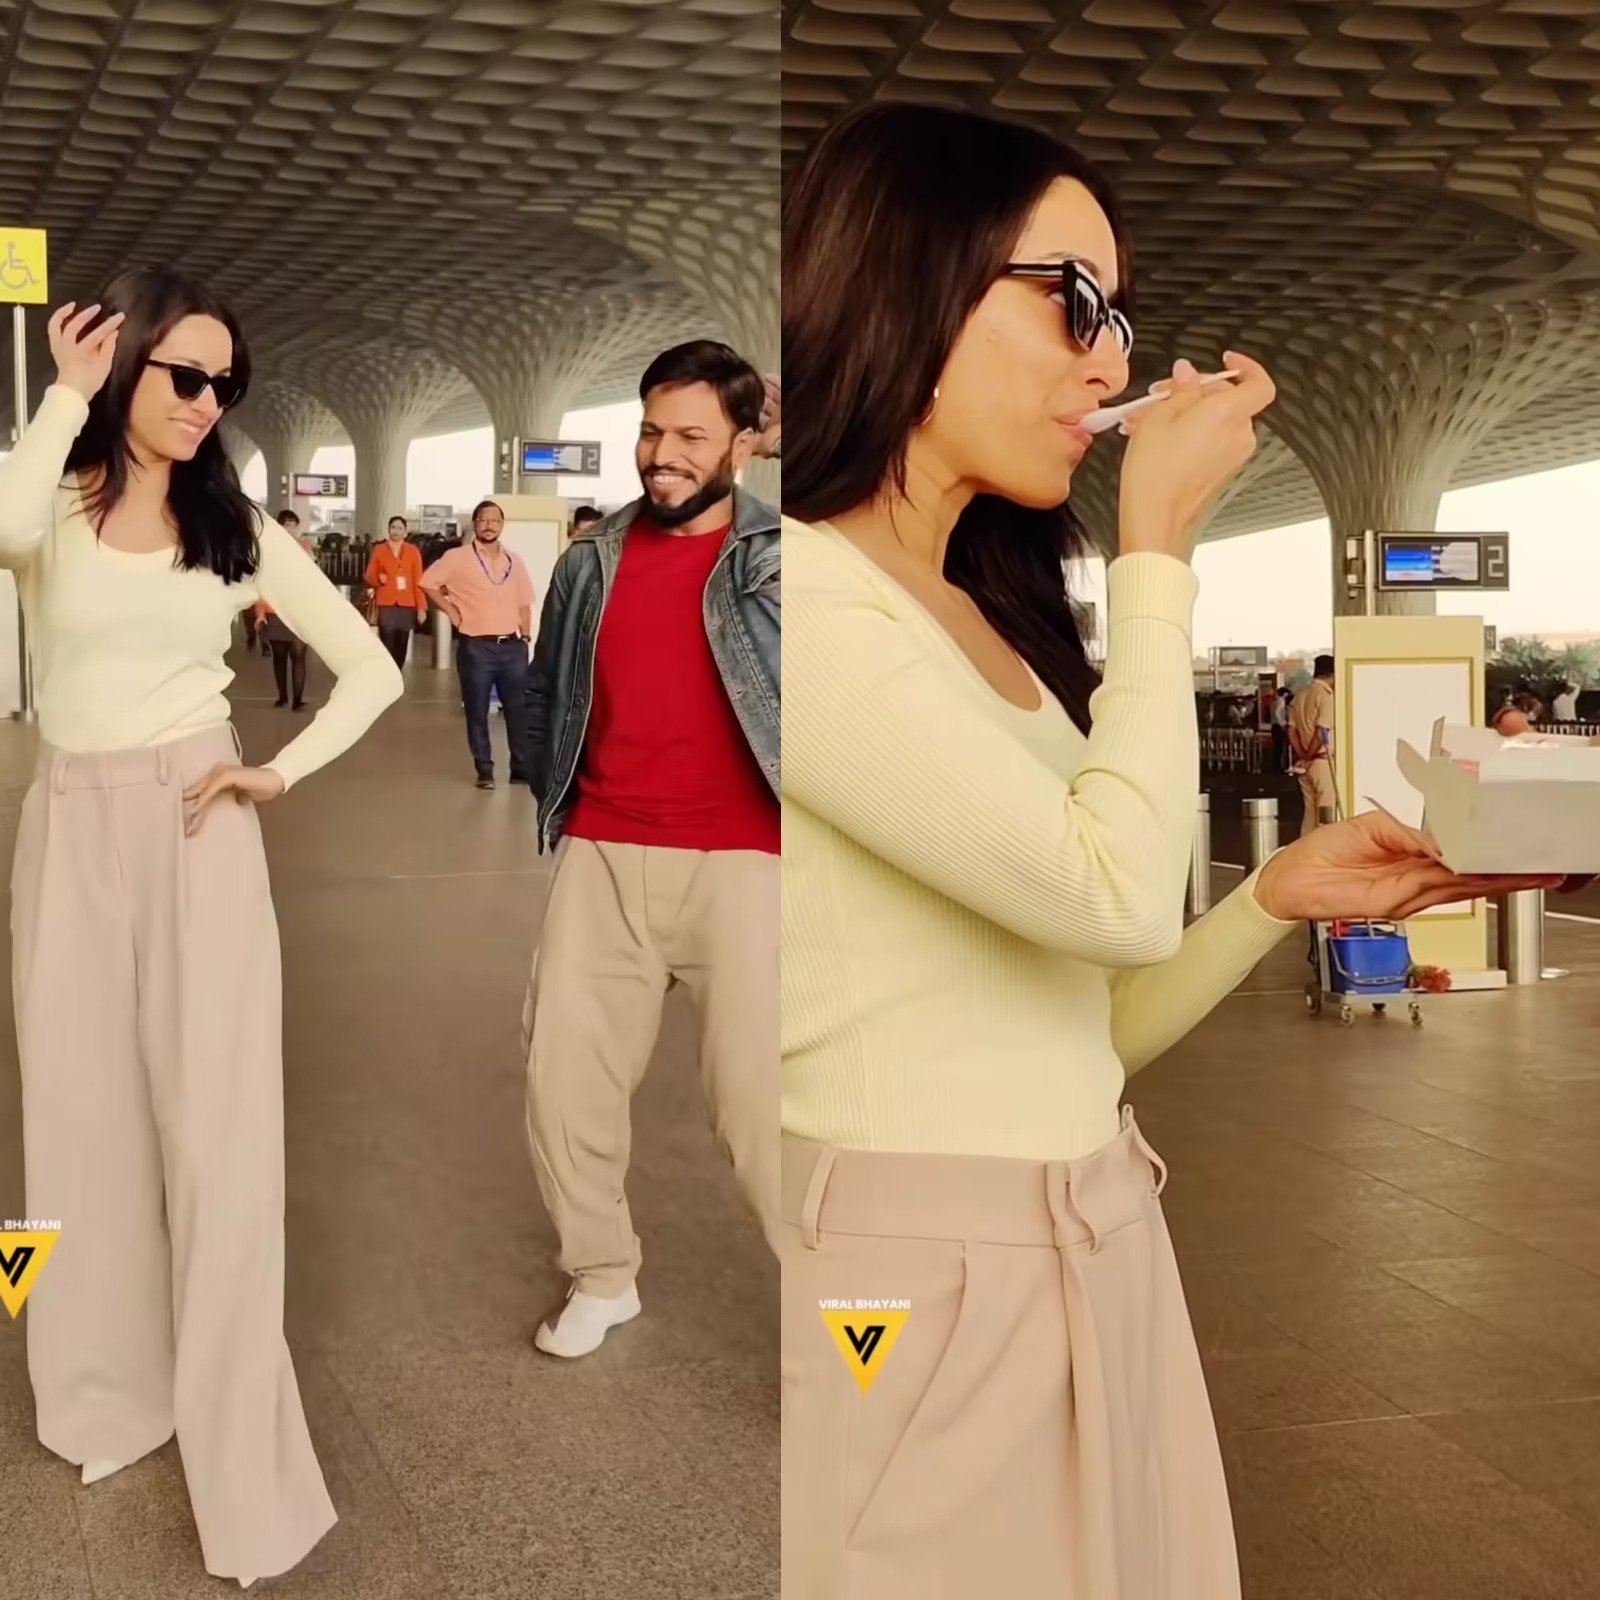 Shraddha Kapoor: Shraddha Kapoor was seen dancing with fans at the airport, the video went viral on the internet